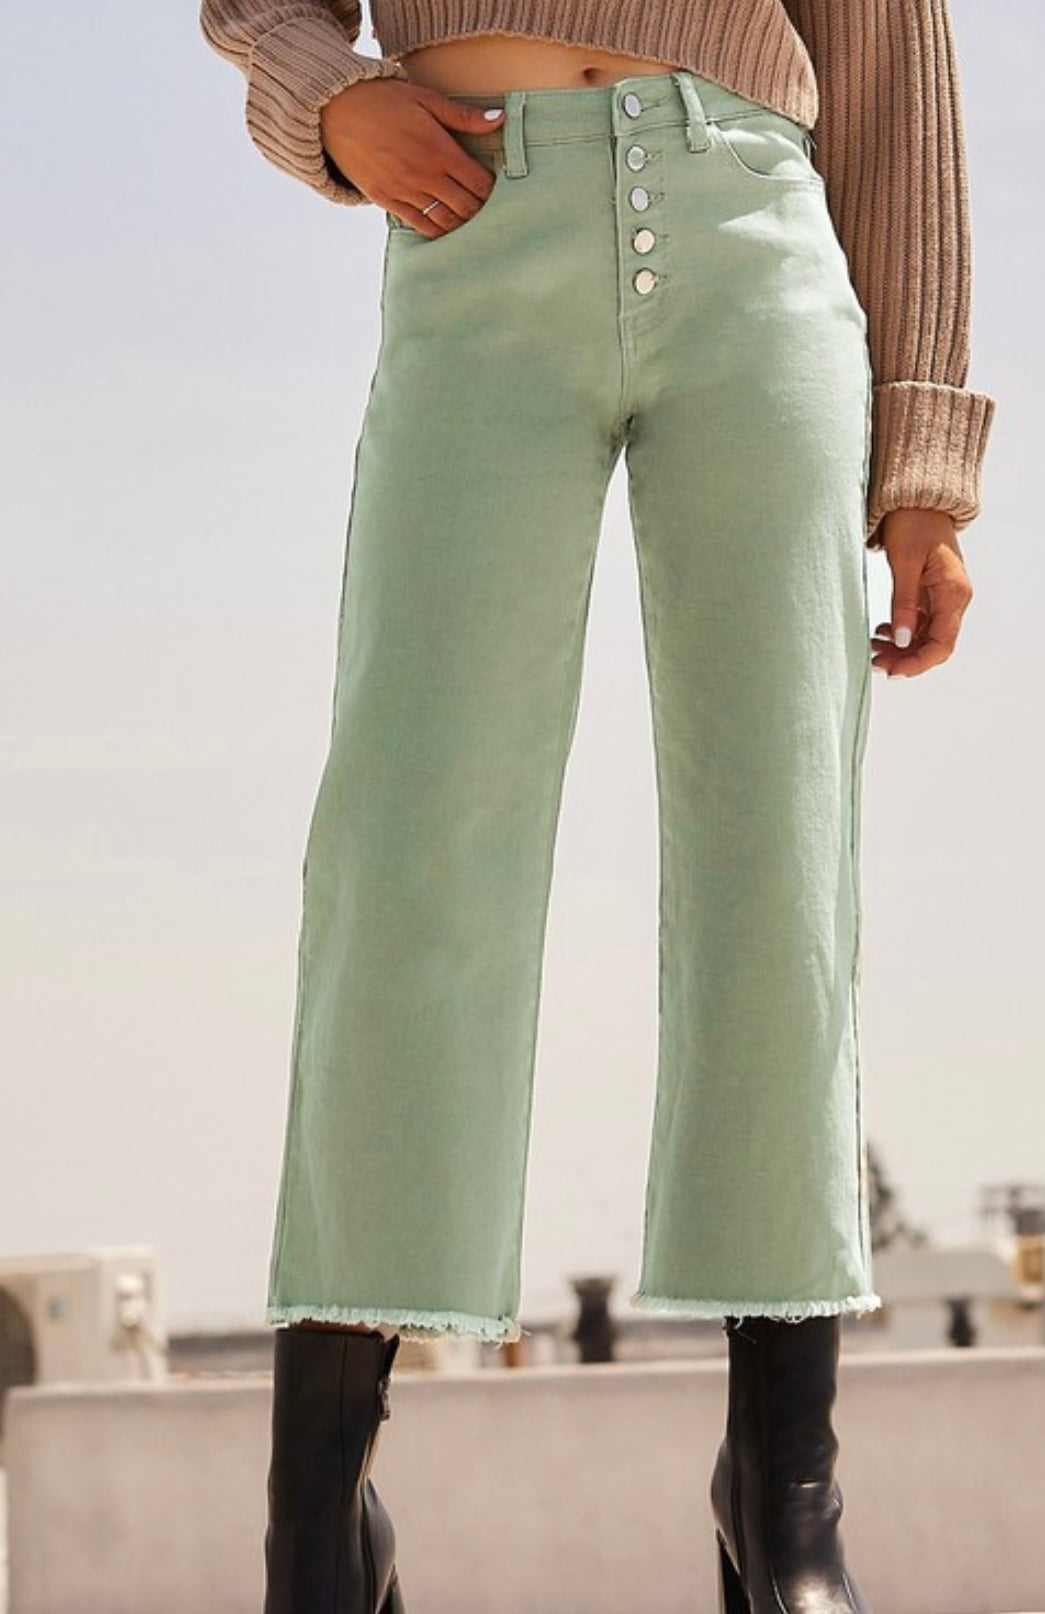 The Cami Cropped Sage Pants